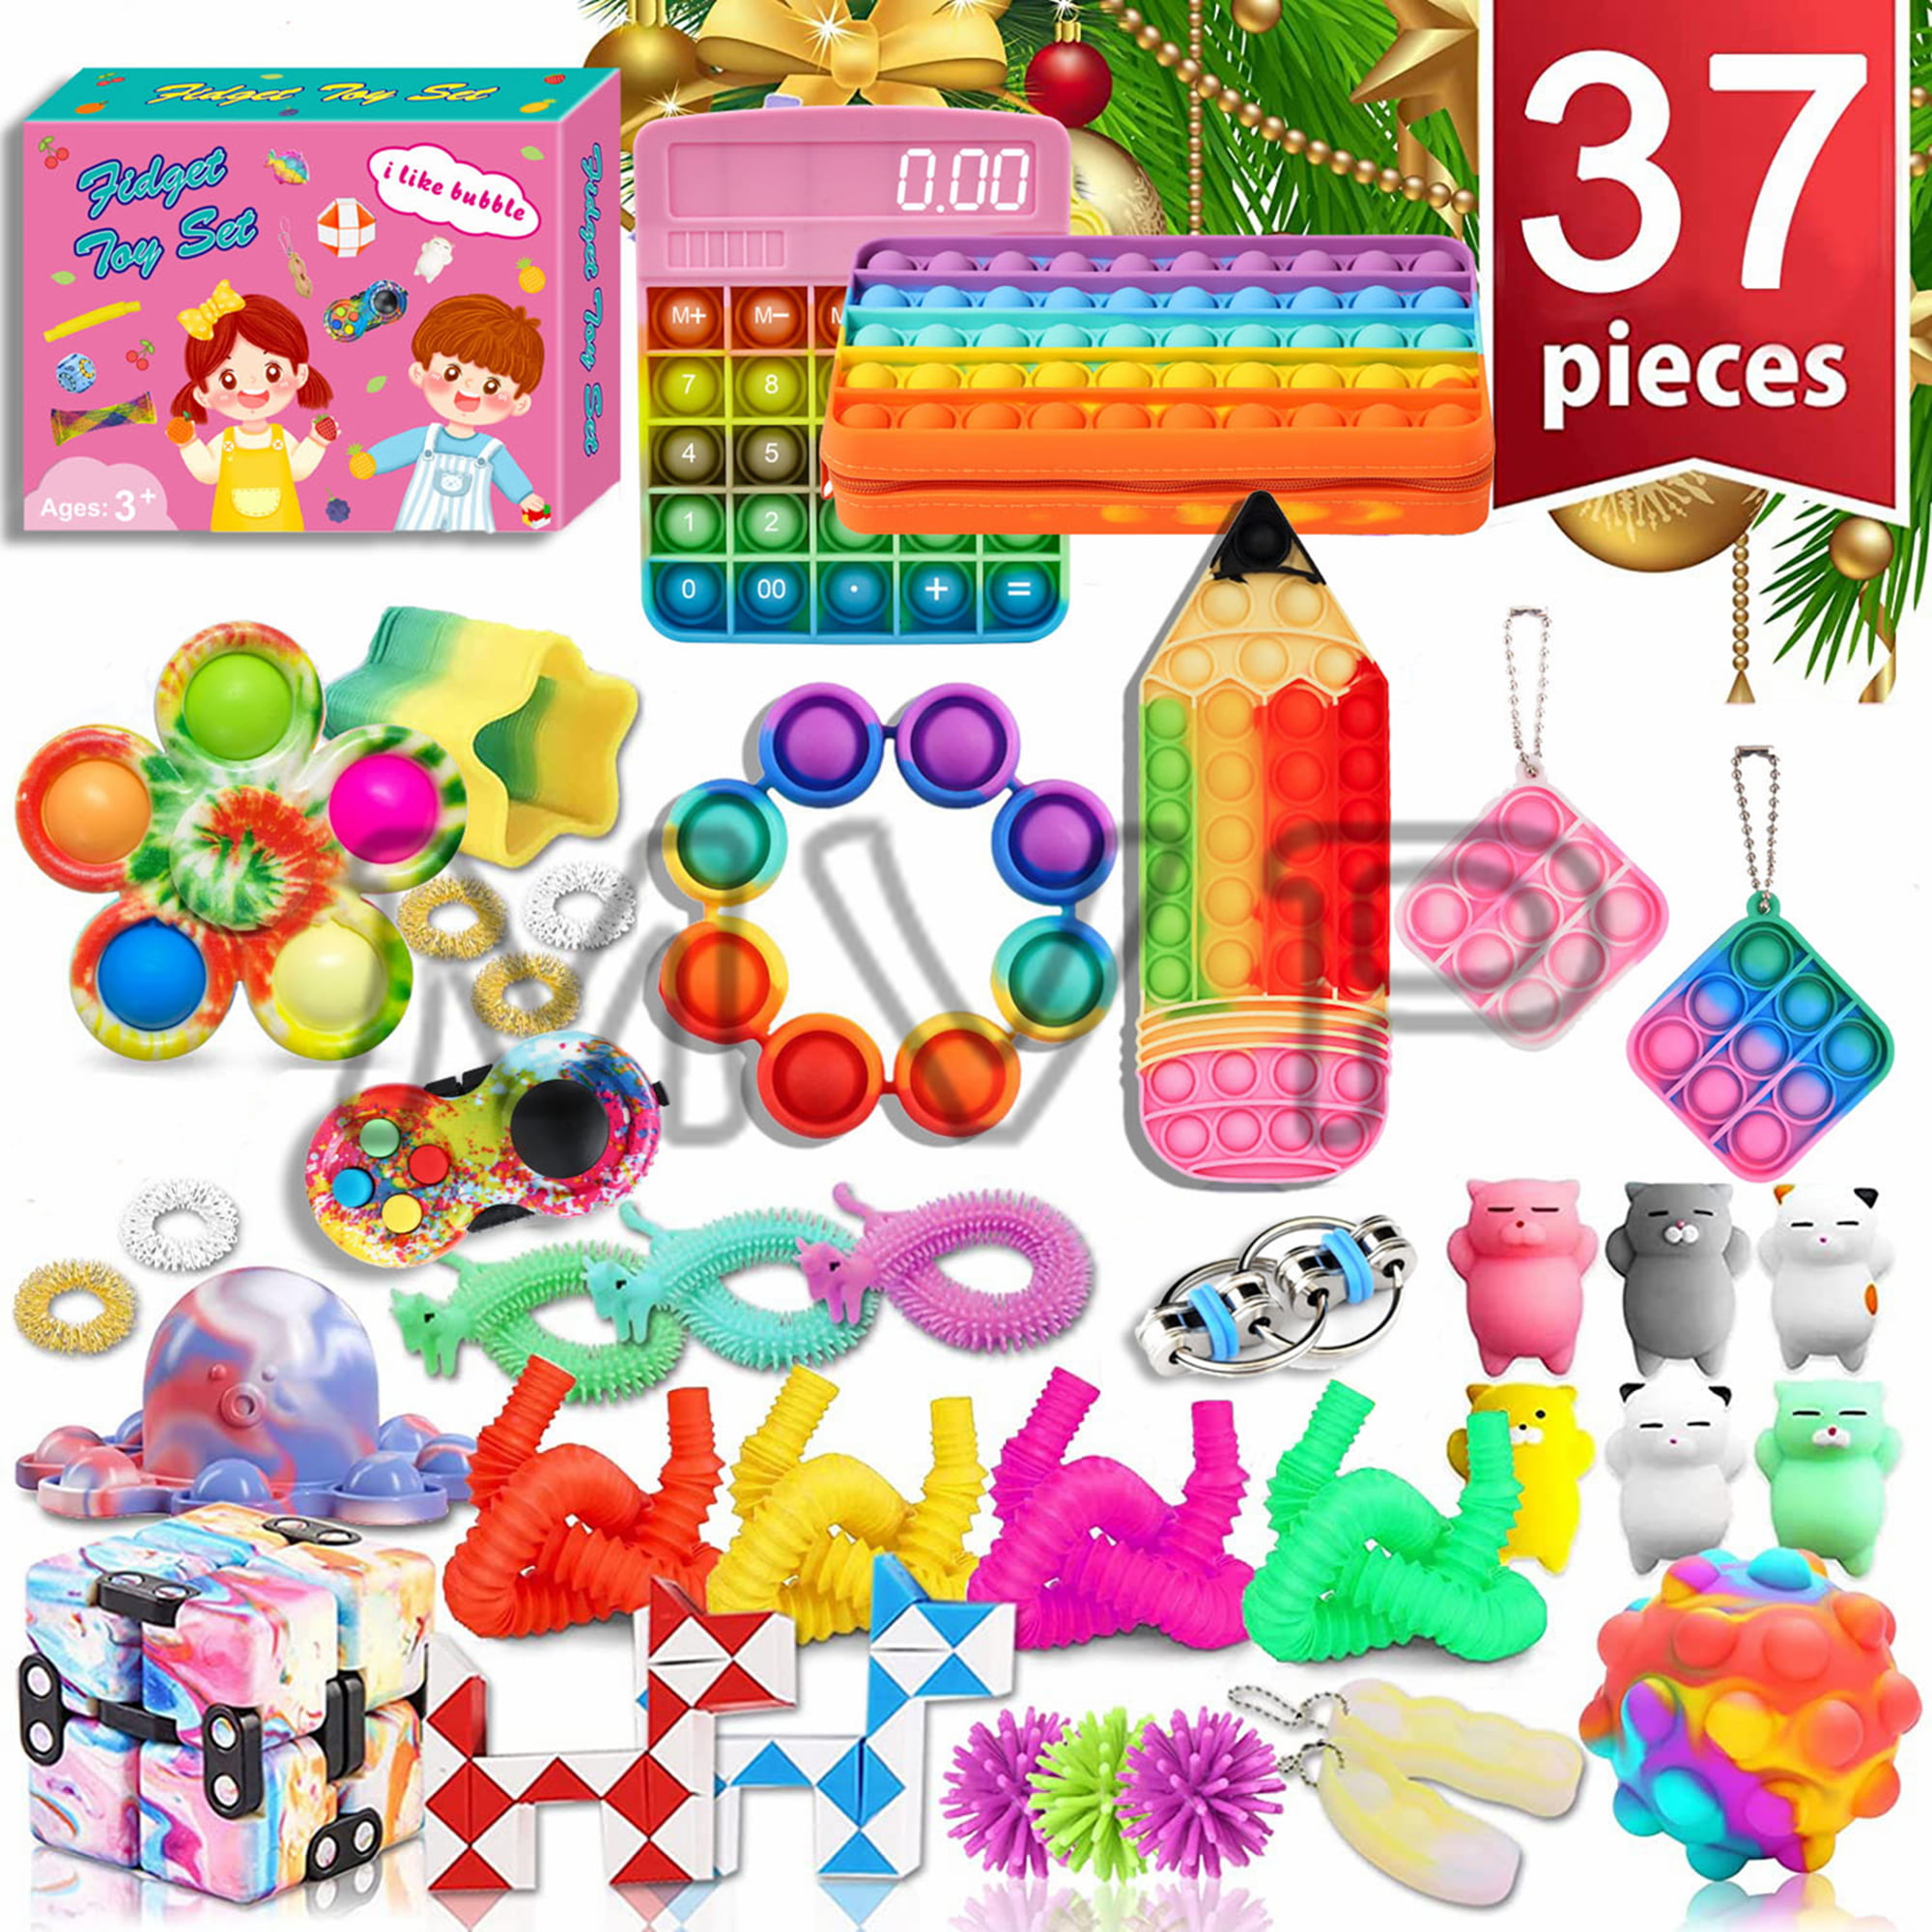 Fidget Sensory Toys Set 37 Pcs Relieves Stress and Anxiety Fidget Toy With Pop Bubble Sensory Fidget and Squeeze Widget for Children Adults Relaxing Therapy Perfect for ADHD Add Anxiety Autism